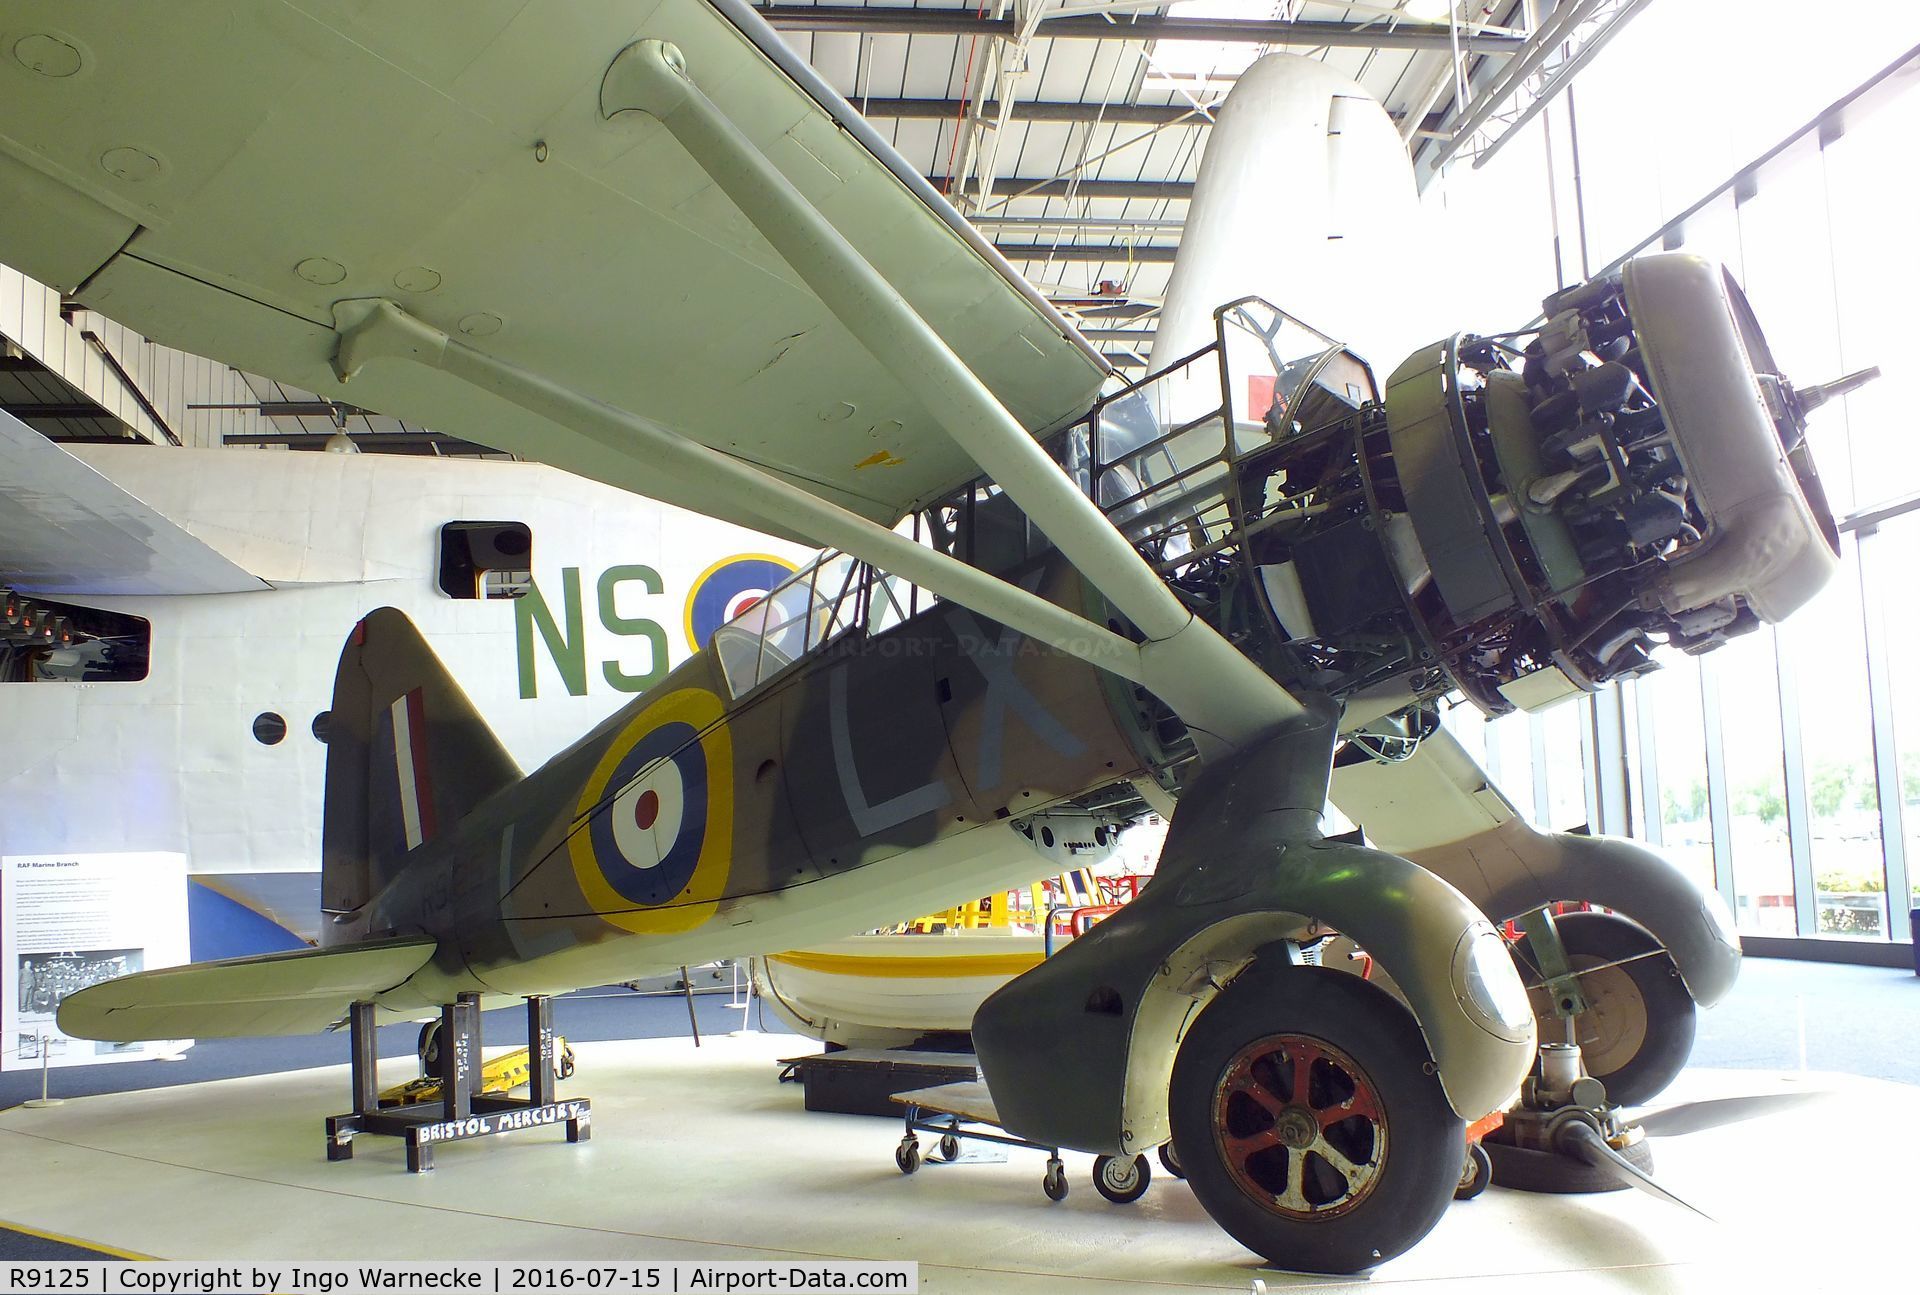 R9125, 1940 Westland Lysander III C/N 1185, Westland Lysander III (getting dismantled for removal from the Battle of Britain Hall) at the RAF-Museum, Hendon